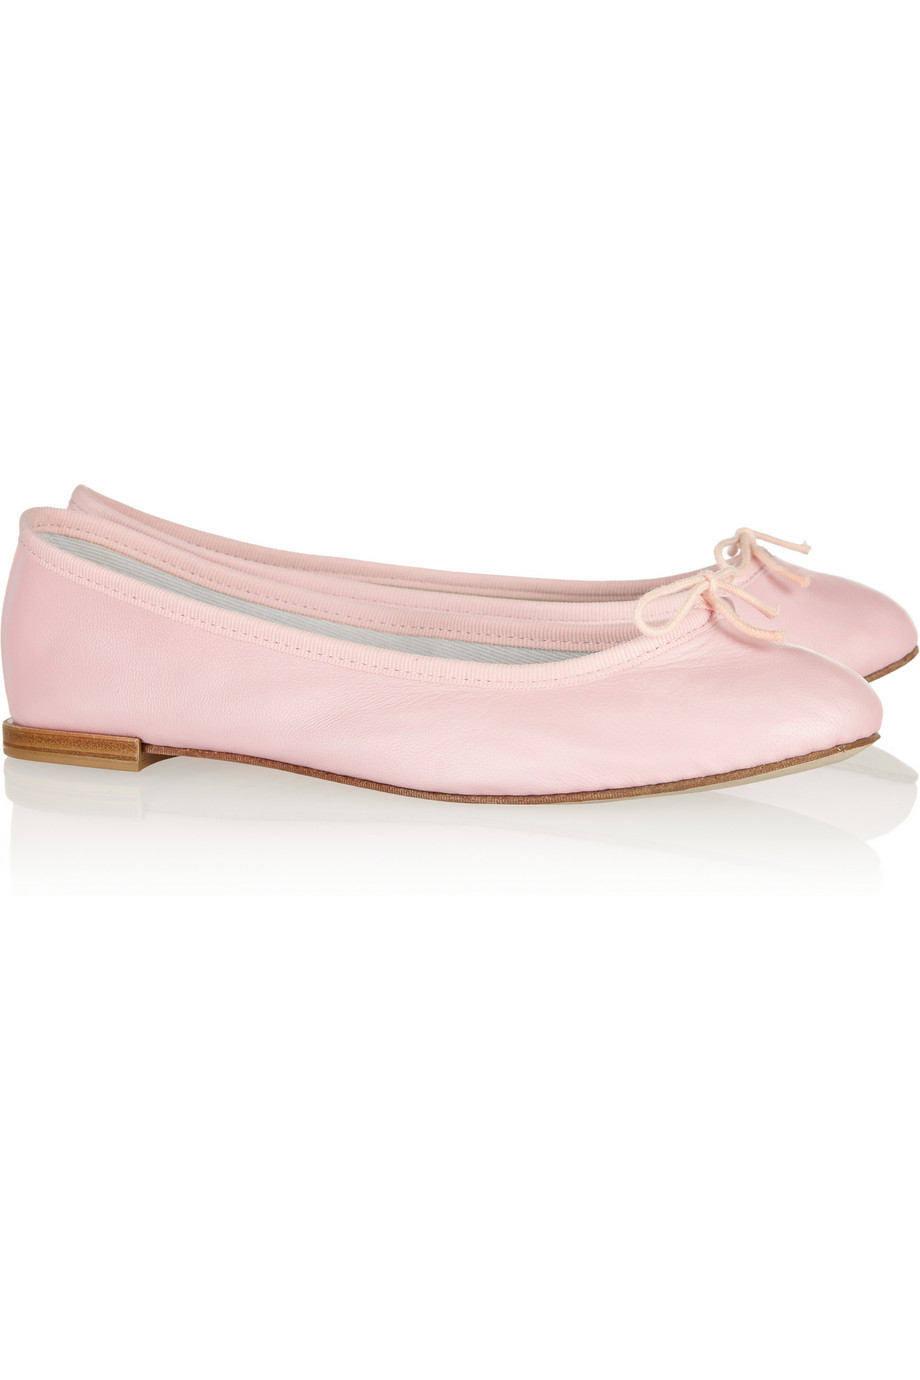 Repetto The Cendrillon Leather Ballet Flats in Pink | Lyst Canada